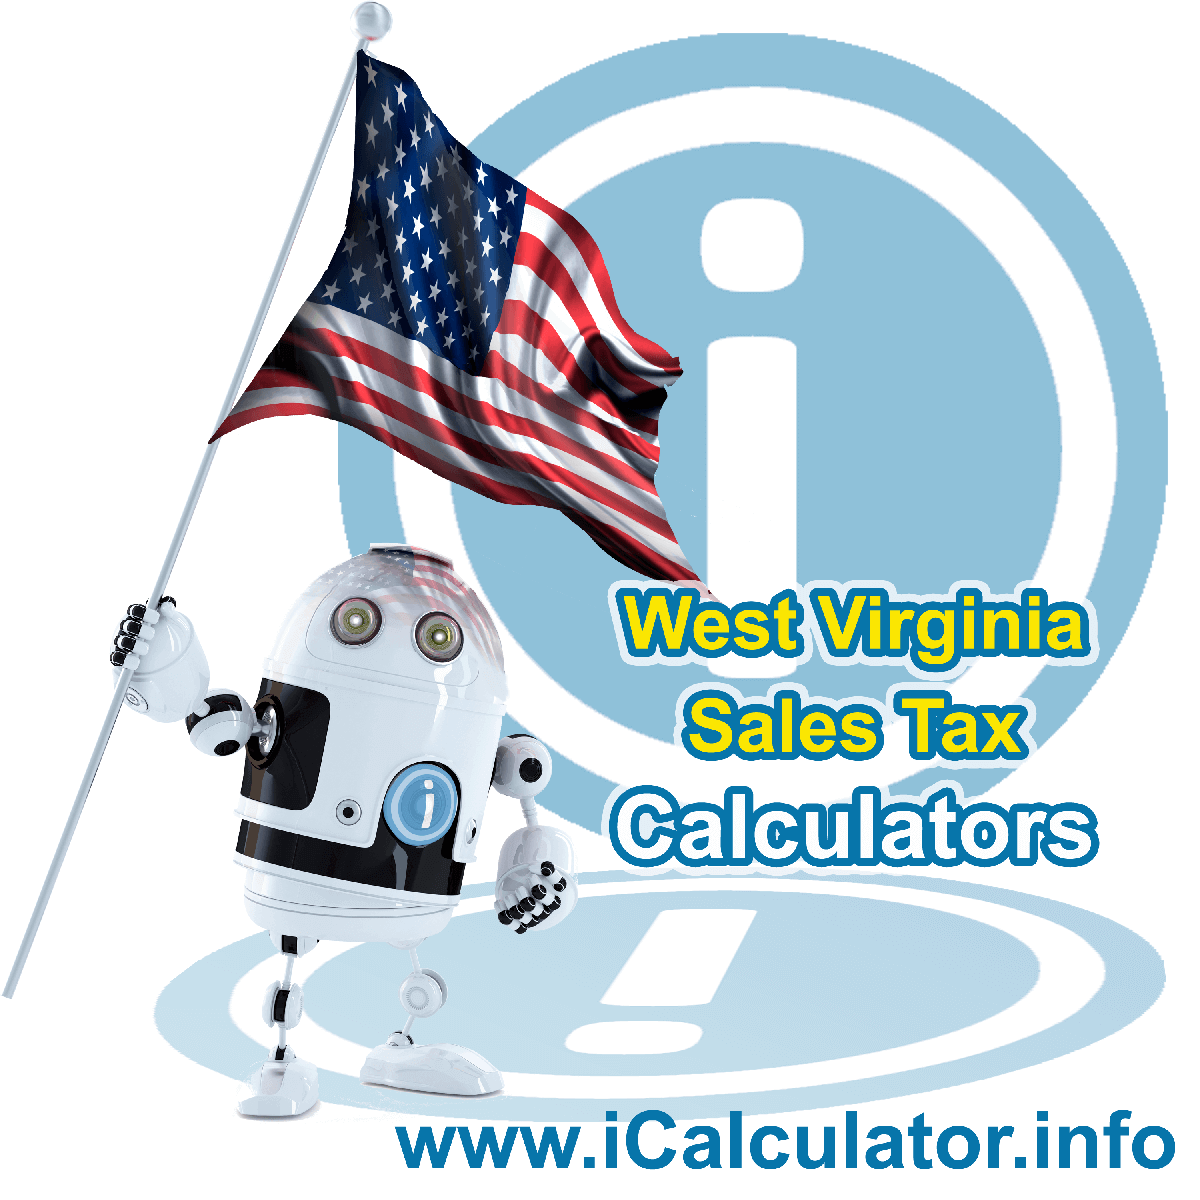 South Charleston, West Virginia Sales Tax Comparison Calculator: This image illustrates a calculator robot comparing sales tax in South Charleston, West Virginia manually using the South Charleston, West Virginia Sales Tax Formula. You can use this information to compare Sales Tax manually or use the South Charleston, West Virginia Sales Tax Comparison Calculator to calculate and compare South Charleston, West Virginia sales tax online.